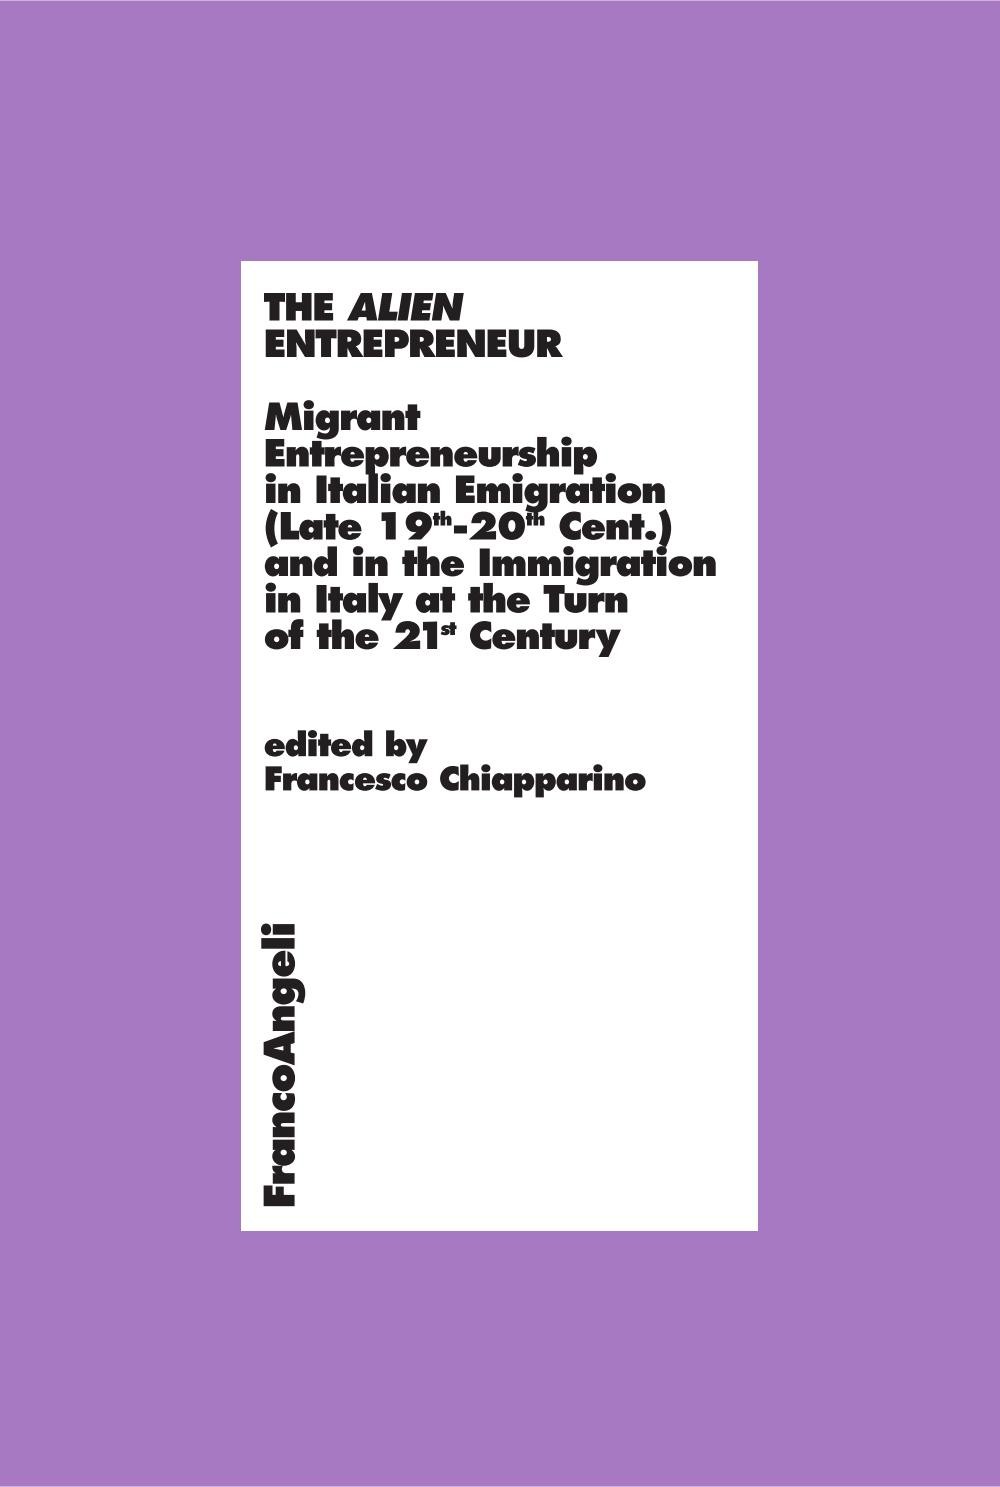 The Alien Entrepreneur. Migrant Entrepreneurship in Italian Emigration (Late 19th-20th Cent.) and in the Immigration in Italy at the Turn of the 21st Century - Librerie.coop